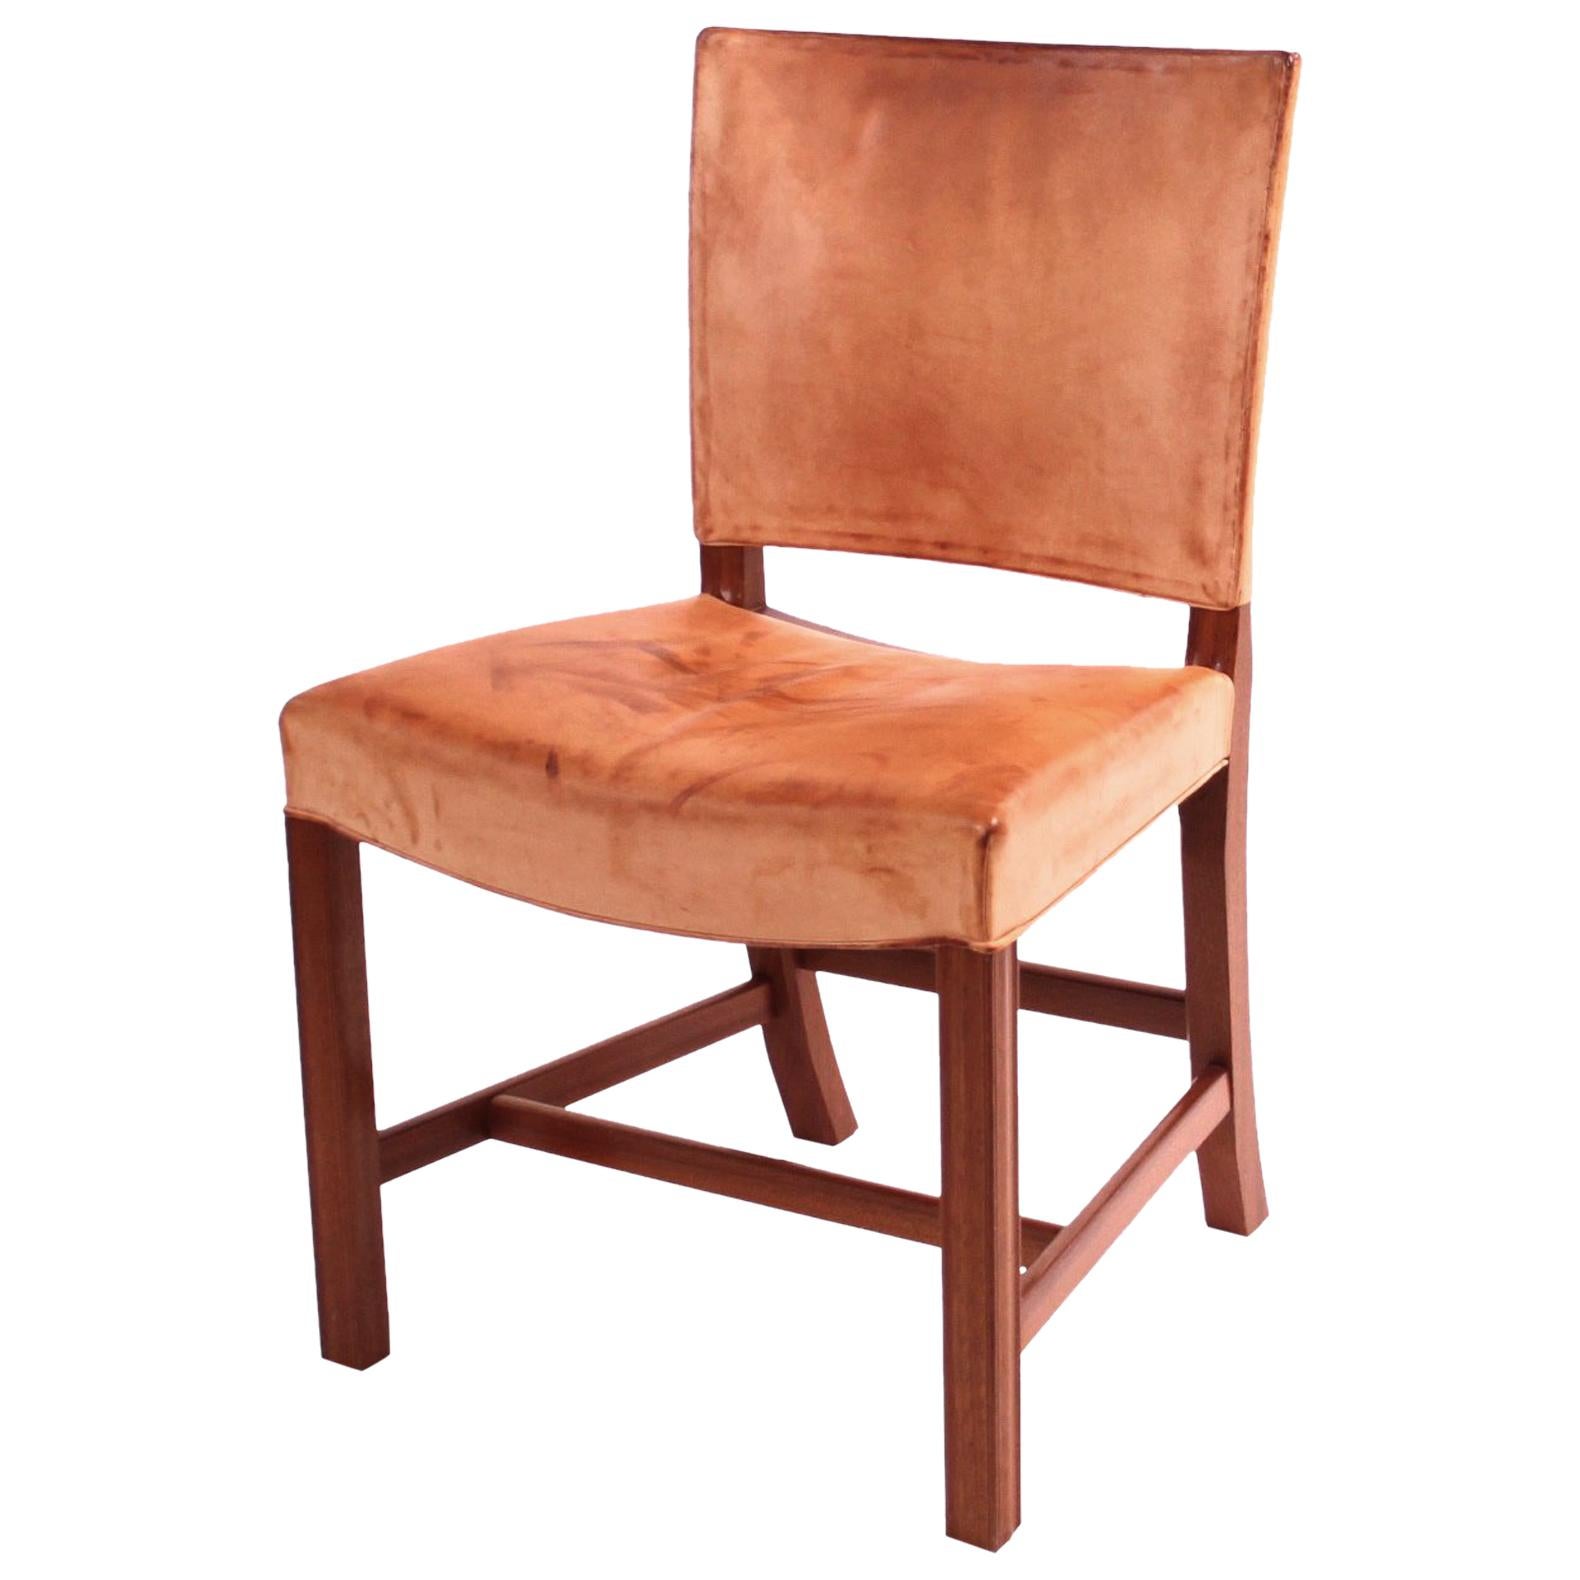 Kaare Klint “Red Chair” in Patinated Natural Leather with Piping